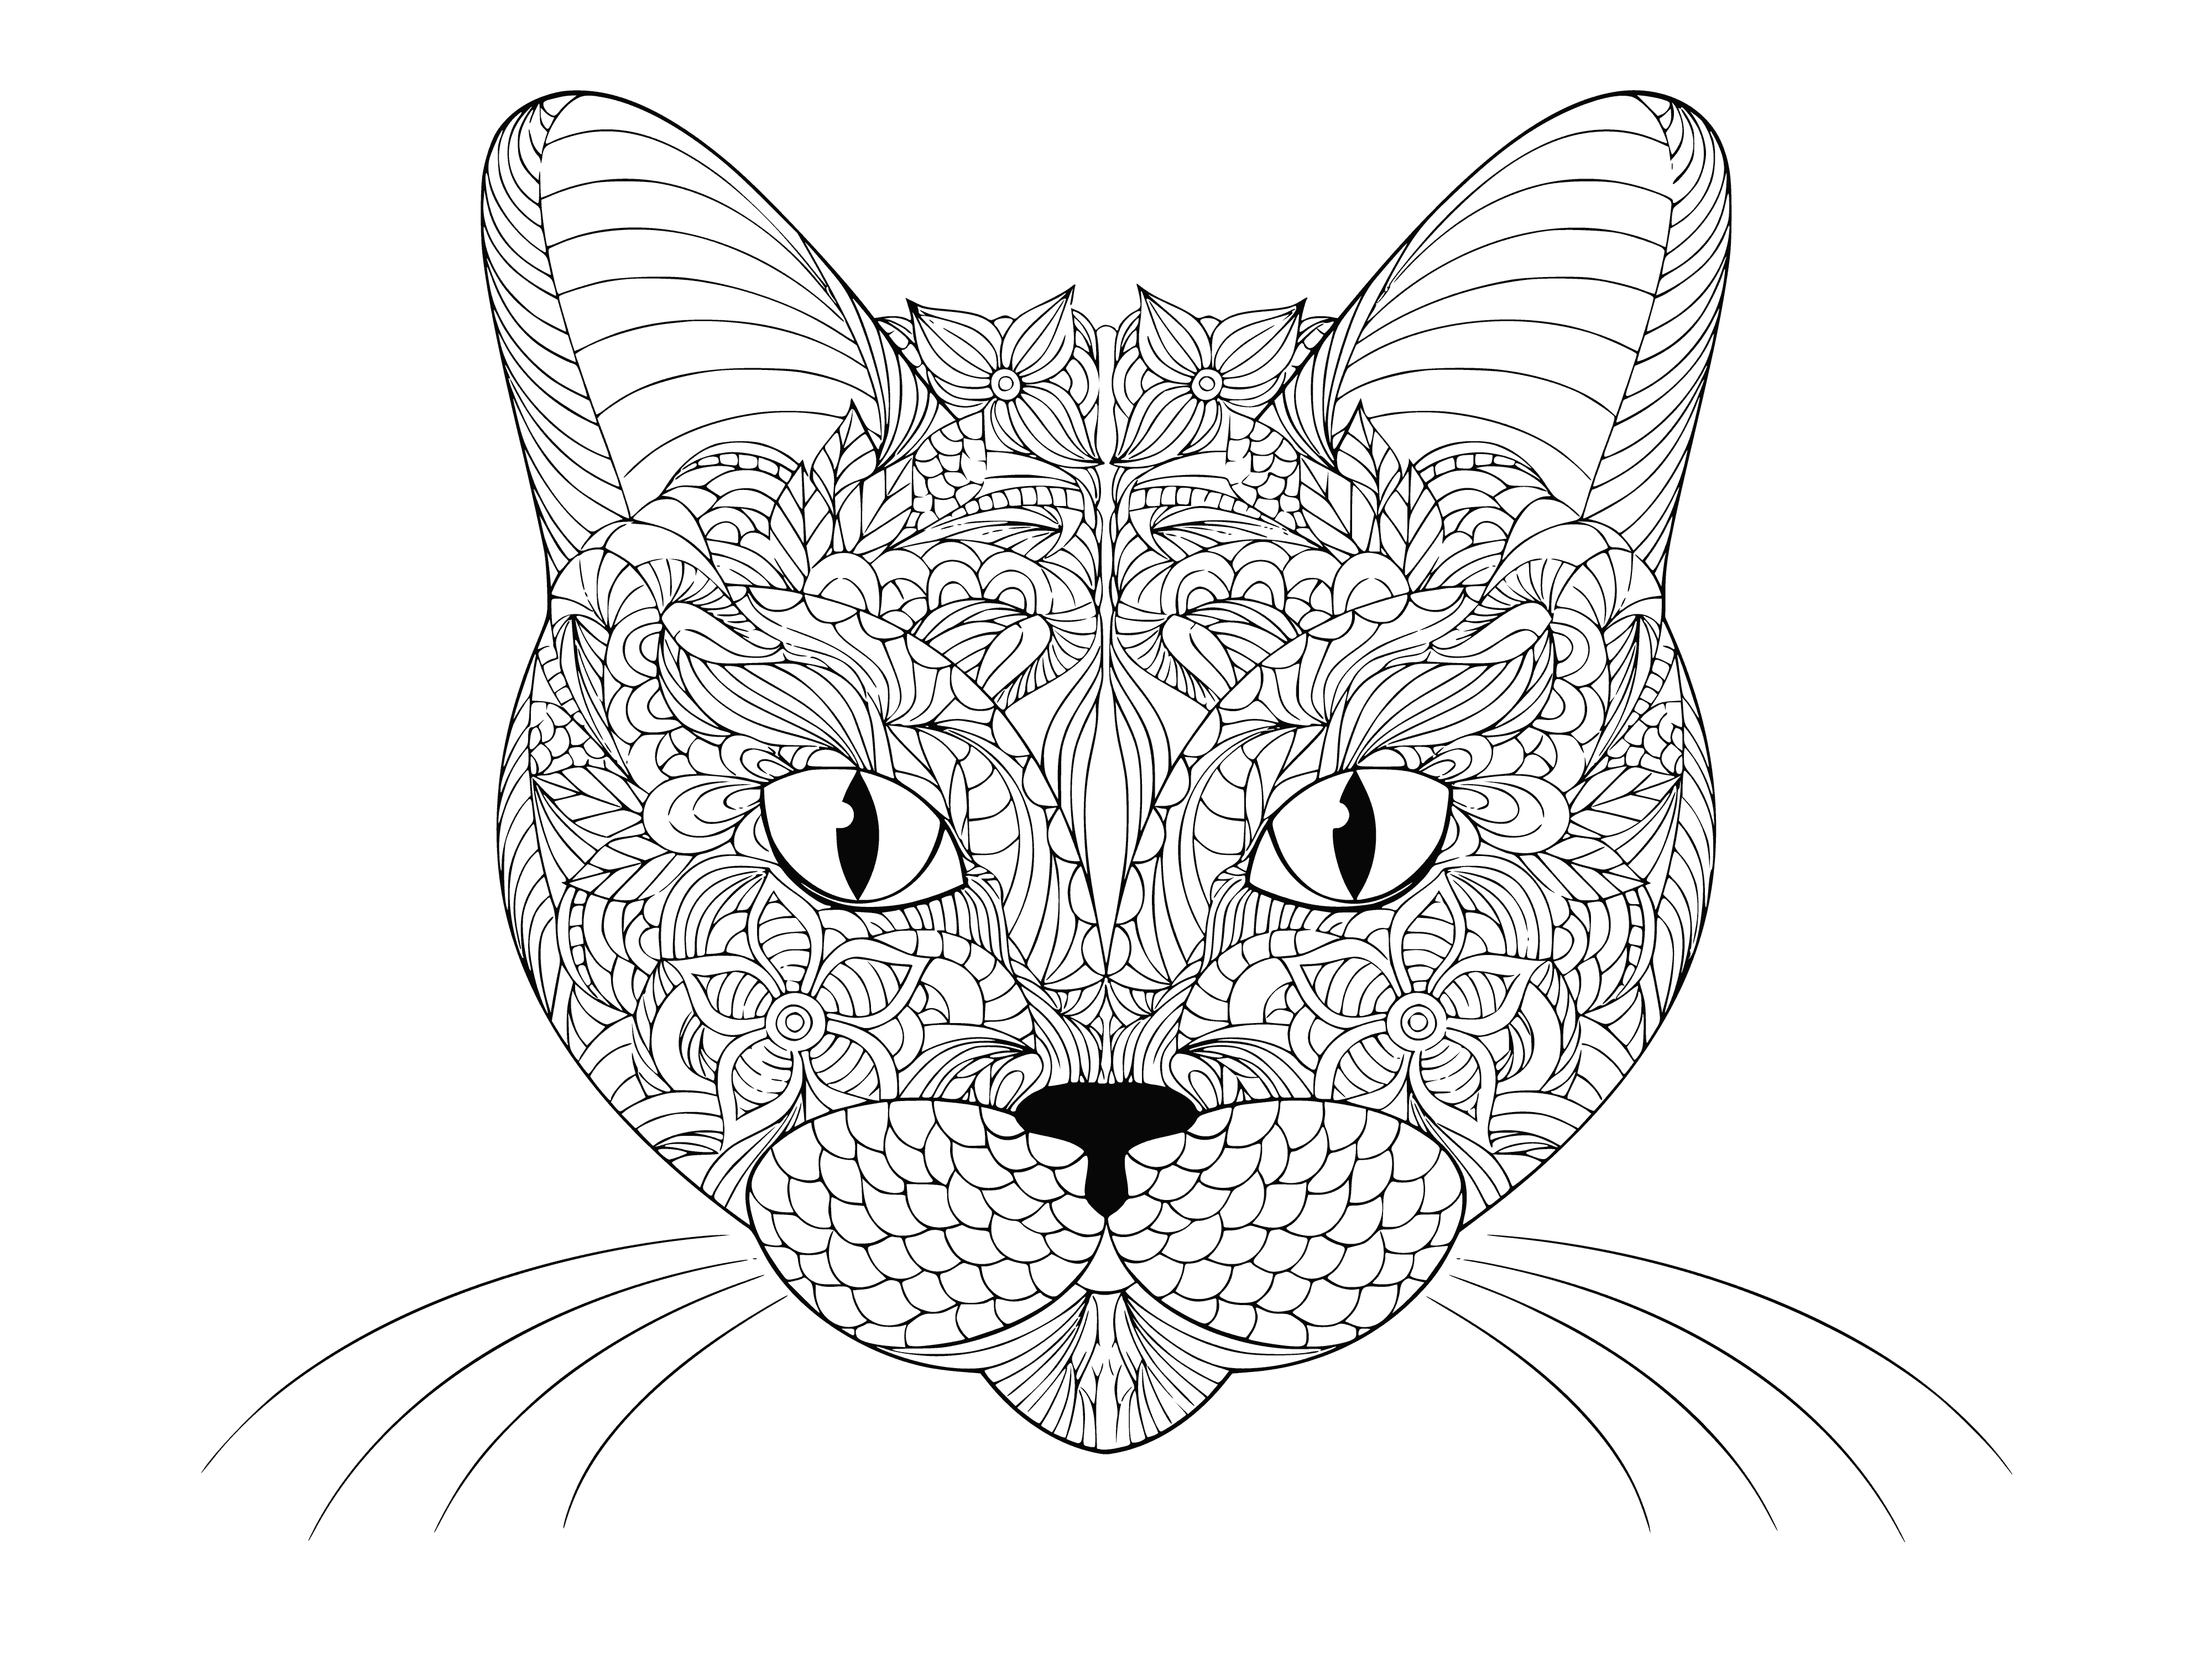 coloring page: Close-up of a cat's face with tongue out & whiskers; blue & purple gradient bg.